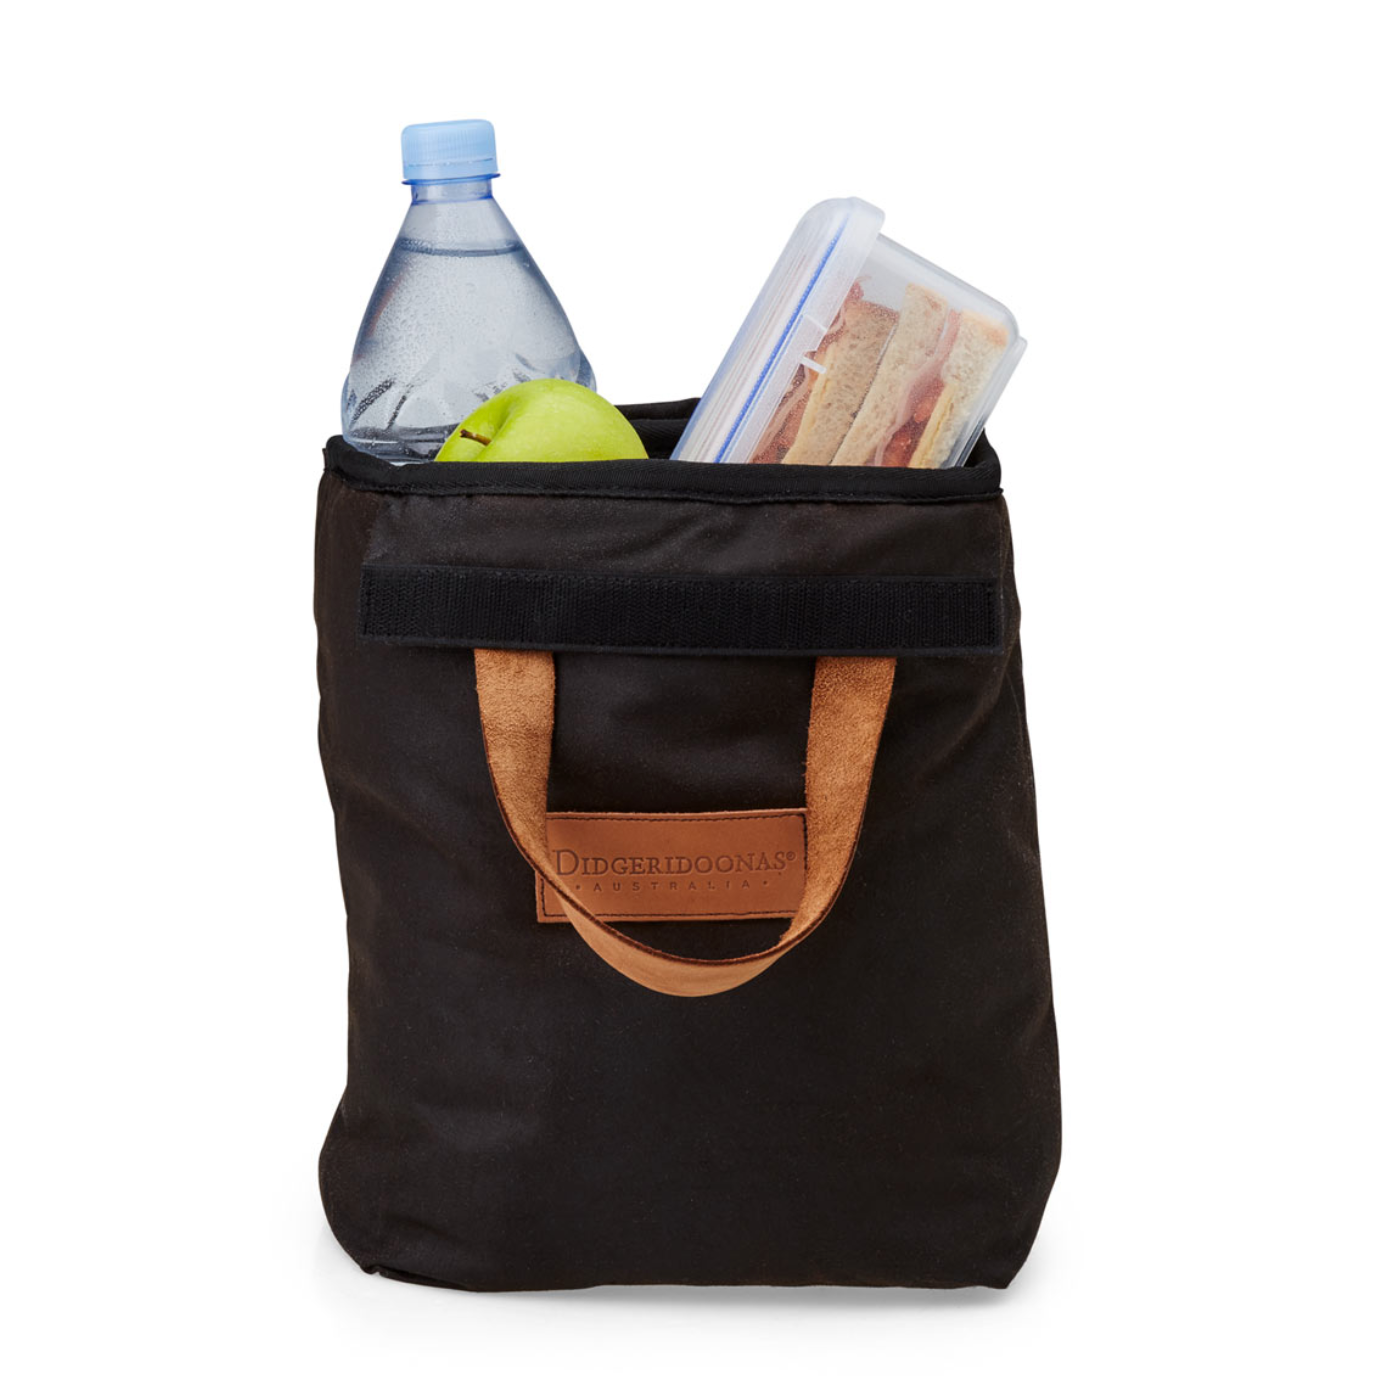 The Tradies Lunch Box - The Golden Apple NZ